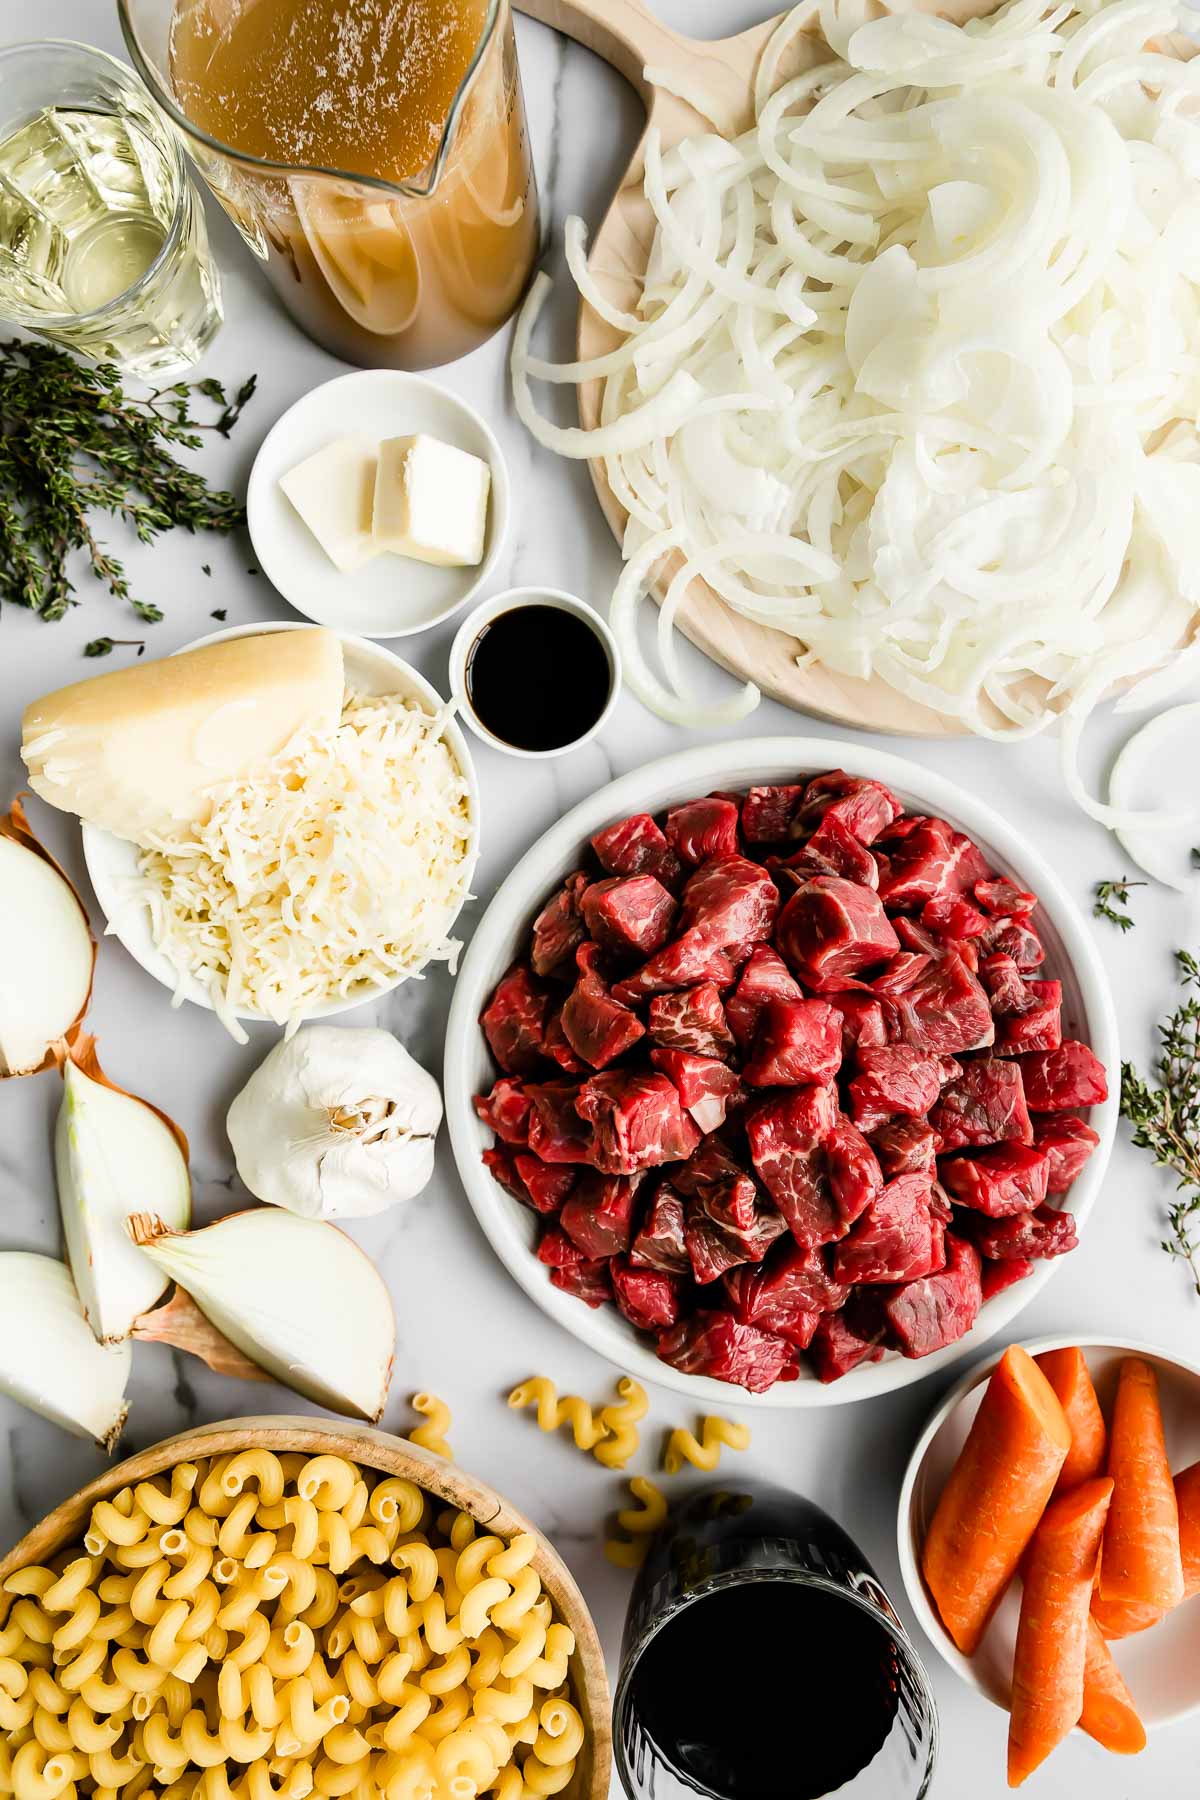 French onion pasta ingredients arranged on a white textured surface: beef stew meat, olive oil, red wine, carrots, yellow onion, garlic, fresh thyme, Worcestershire sauce, beef stock or beef broth, unsalted butter, sweet onions, sherry, cavatappi pasta, and gruyère cheese.